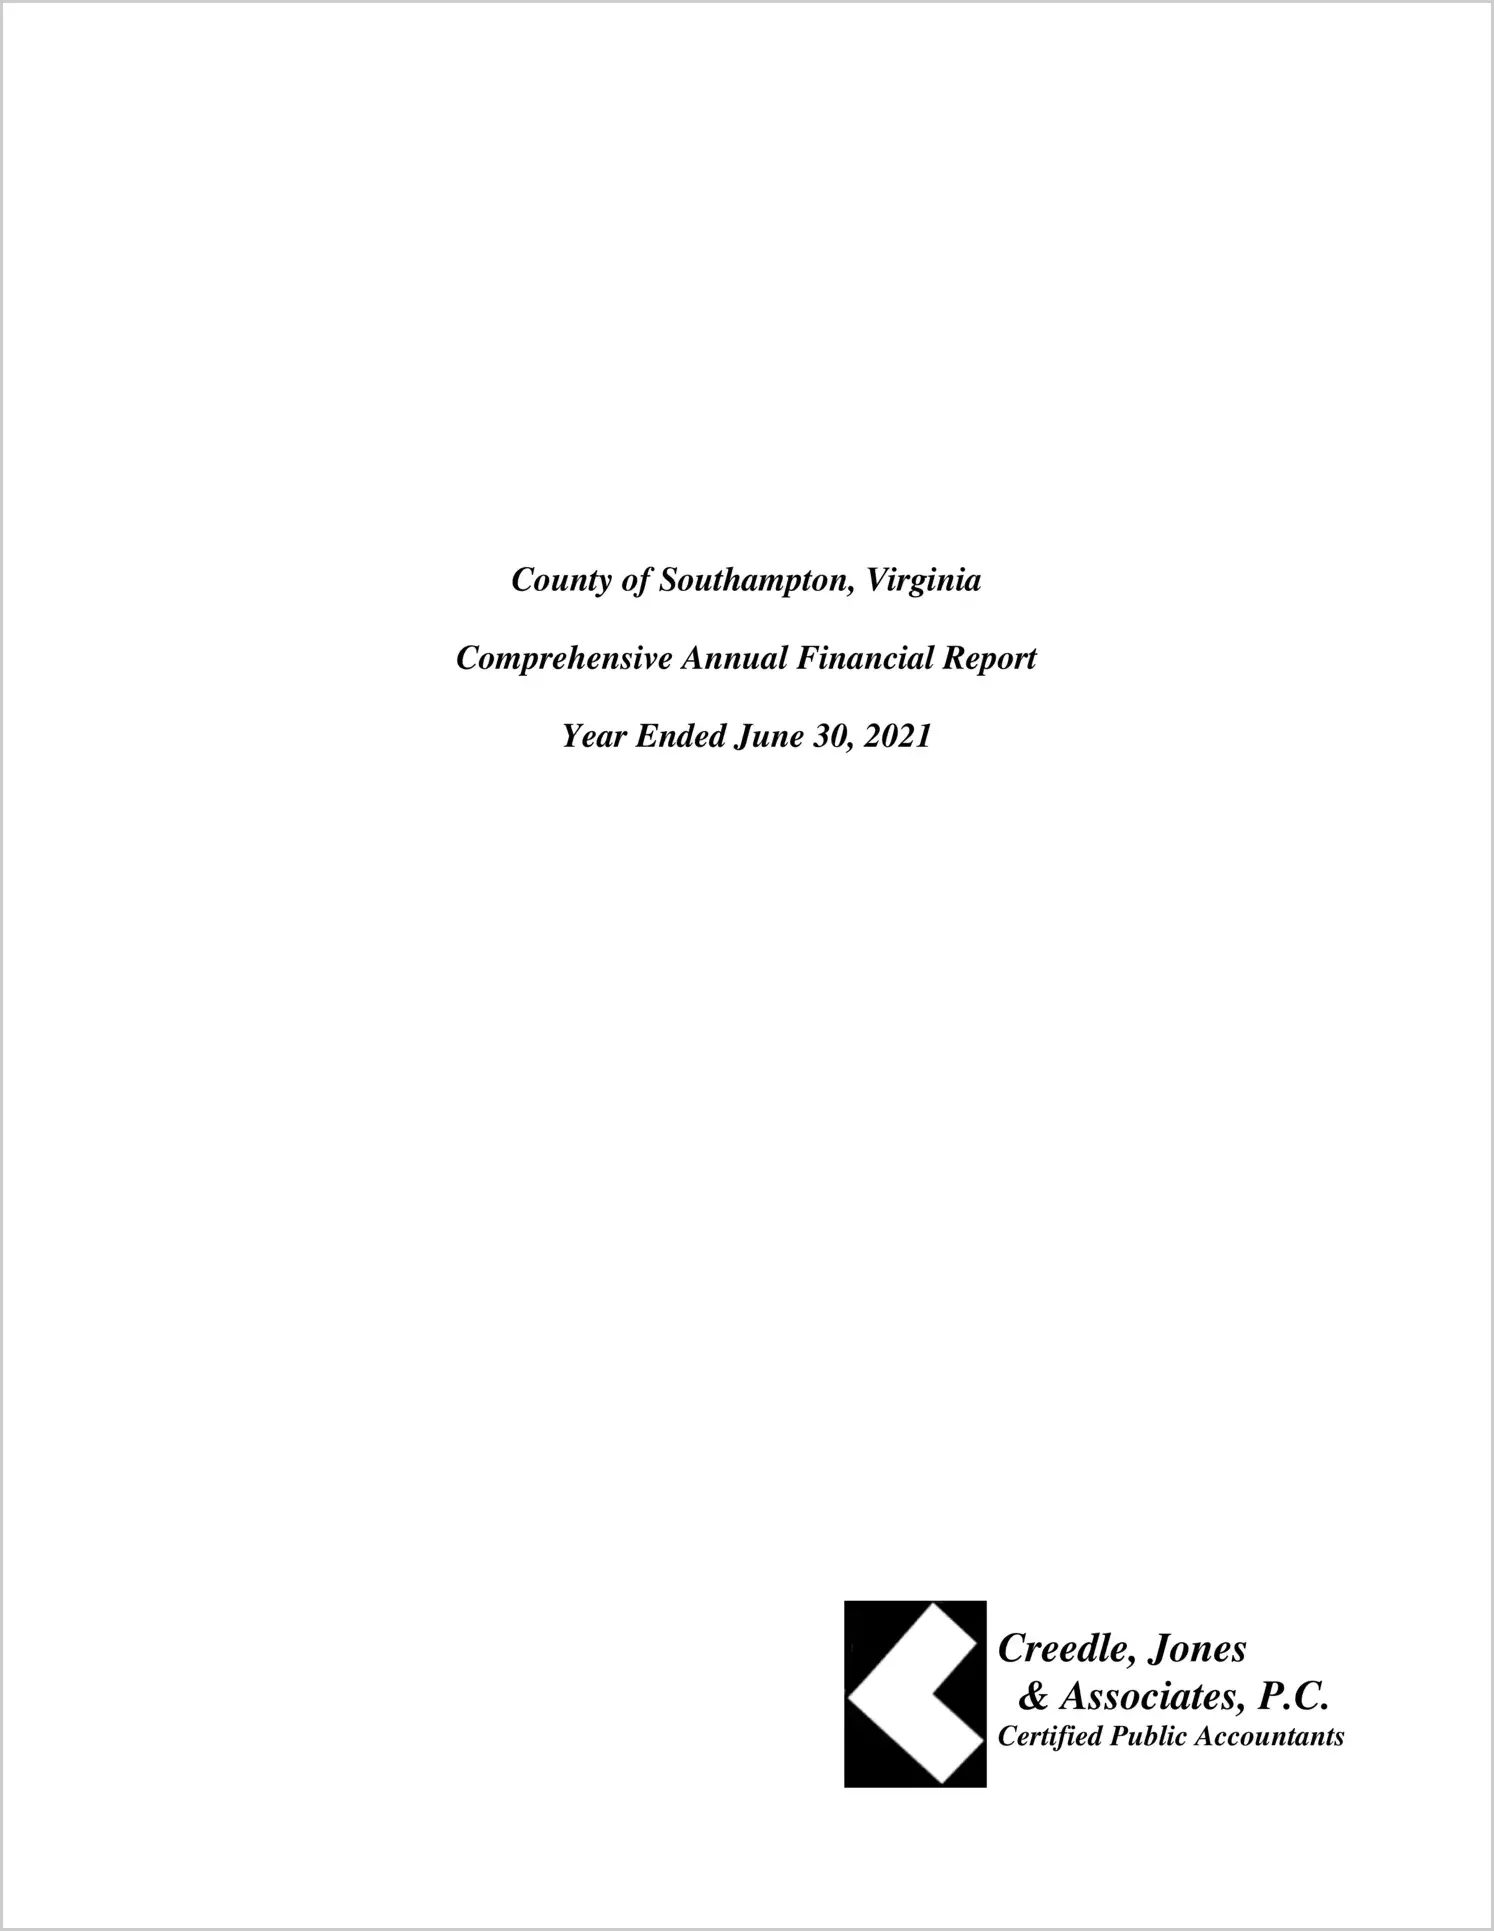 2021 Annual Financial Report for County of Southampton